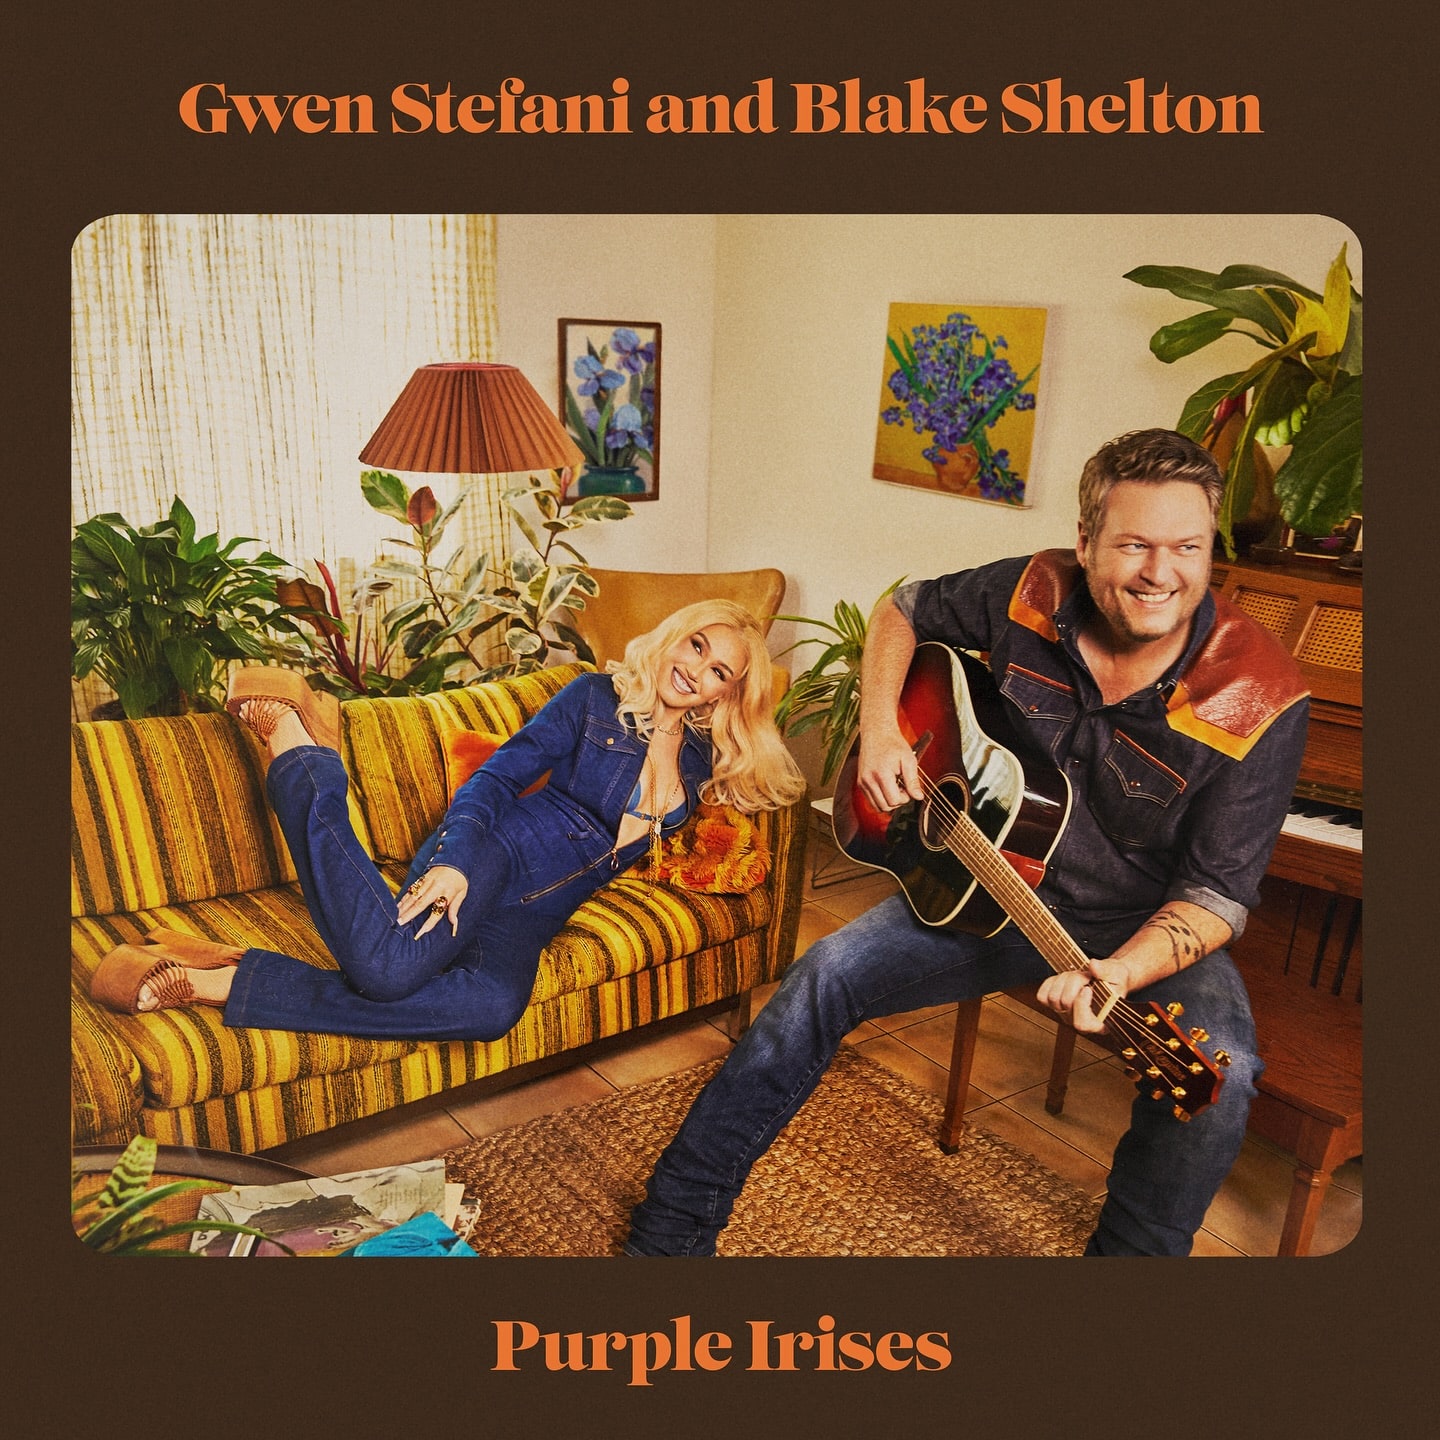 Blake Shelton and Gwen Stefani married in 2021, and released their duet "Purple Irises" in 2024